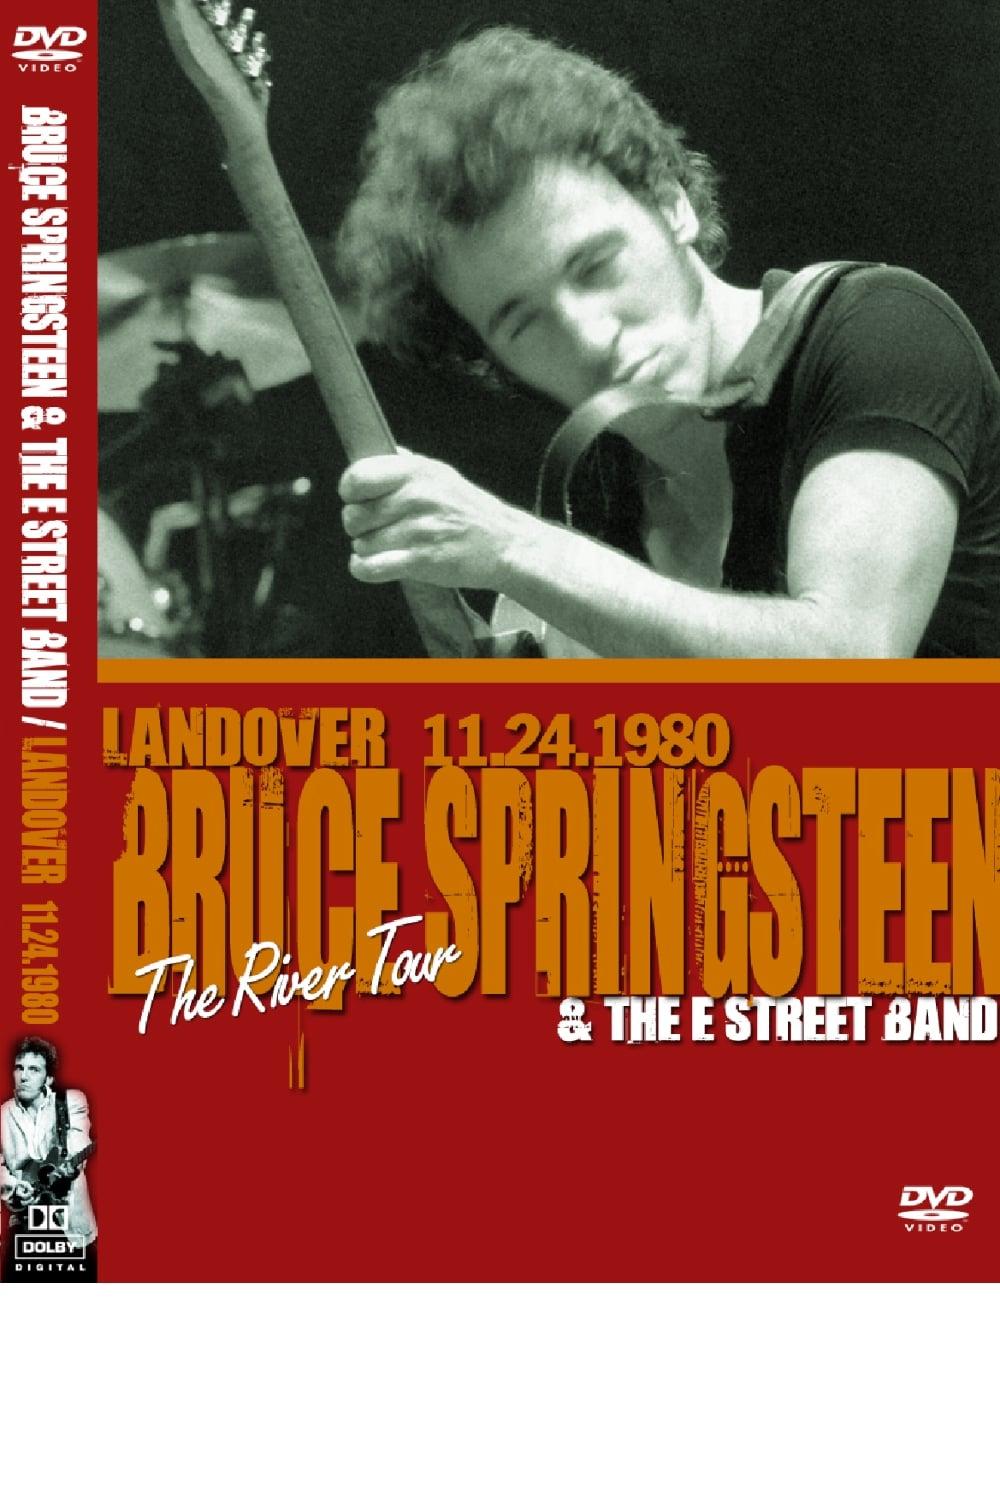 Bruce Springsteen and the E Street Band: Landover poster